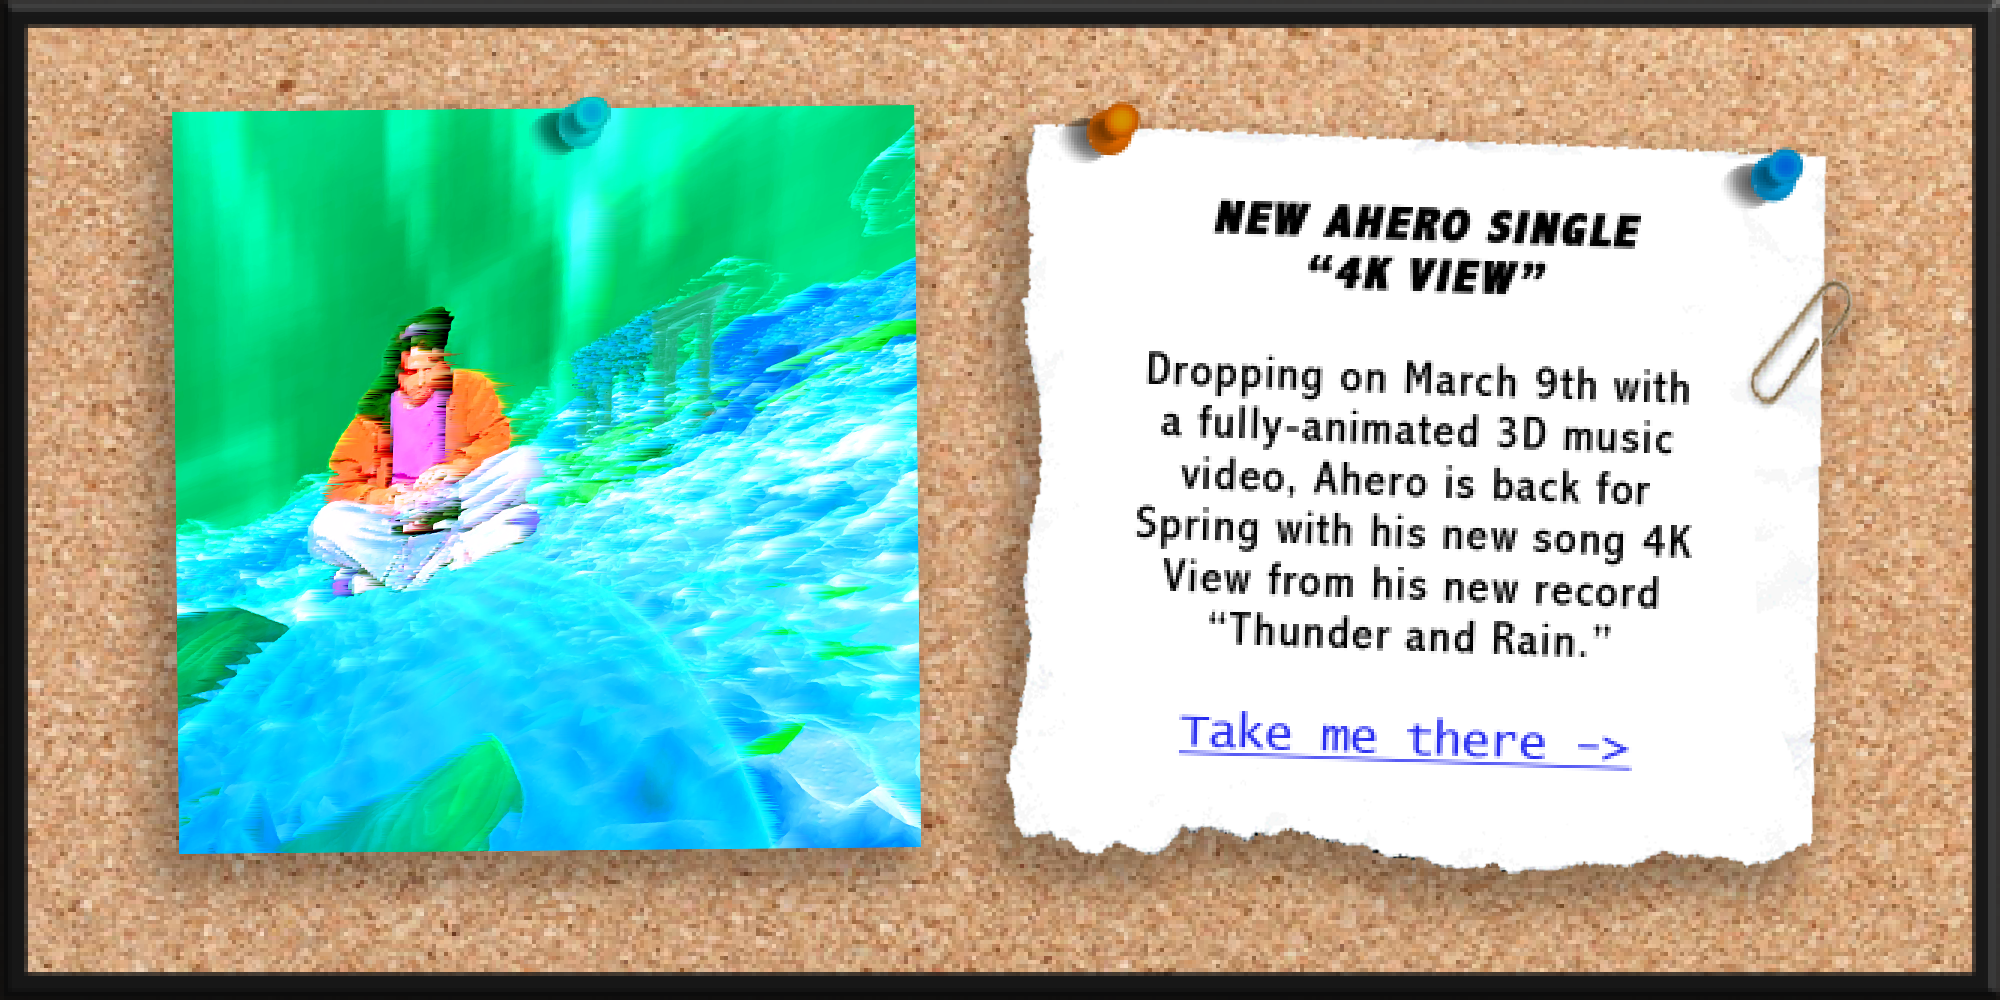 Dropping on March 9th with a fully-animated 3D music video, Ahero is back for Spring with his new song 4K View from his new record Thunder and Rain.